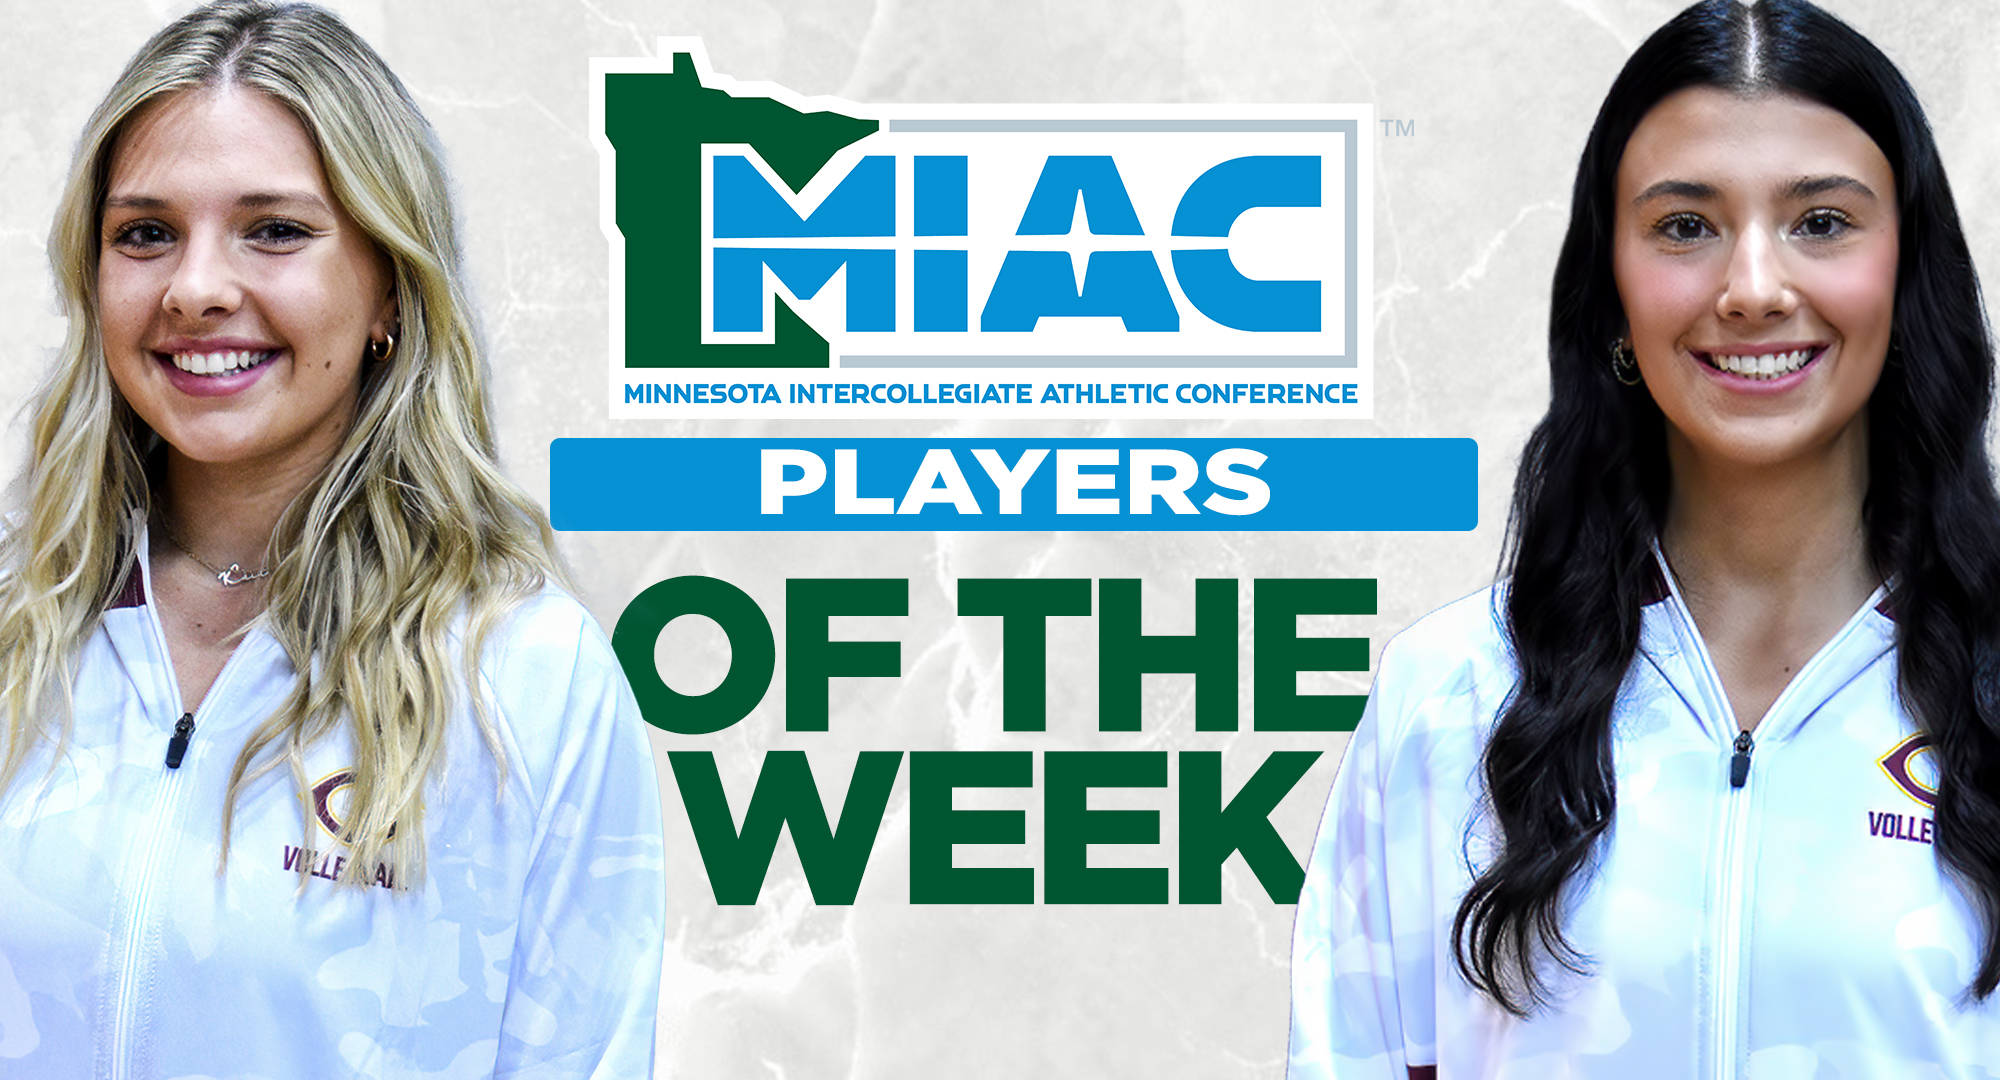 Kaia Lill (L) was named the MIAC Specialty Player of the Week and teammate Mallory Leitner was named the MIAC Offensive Player of the Week.